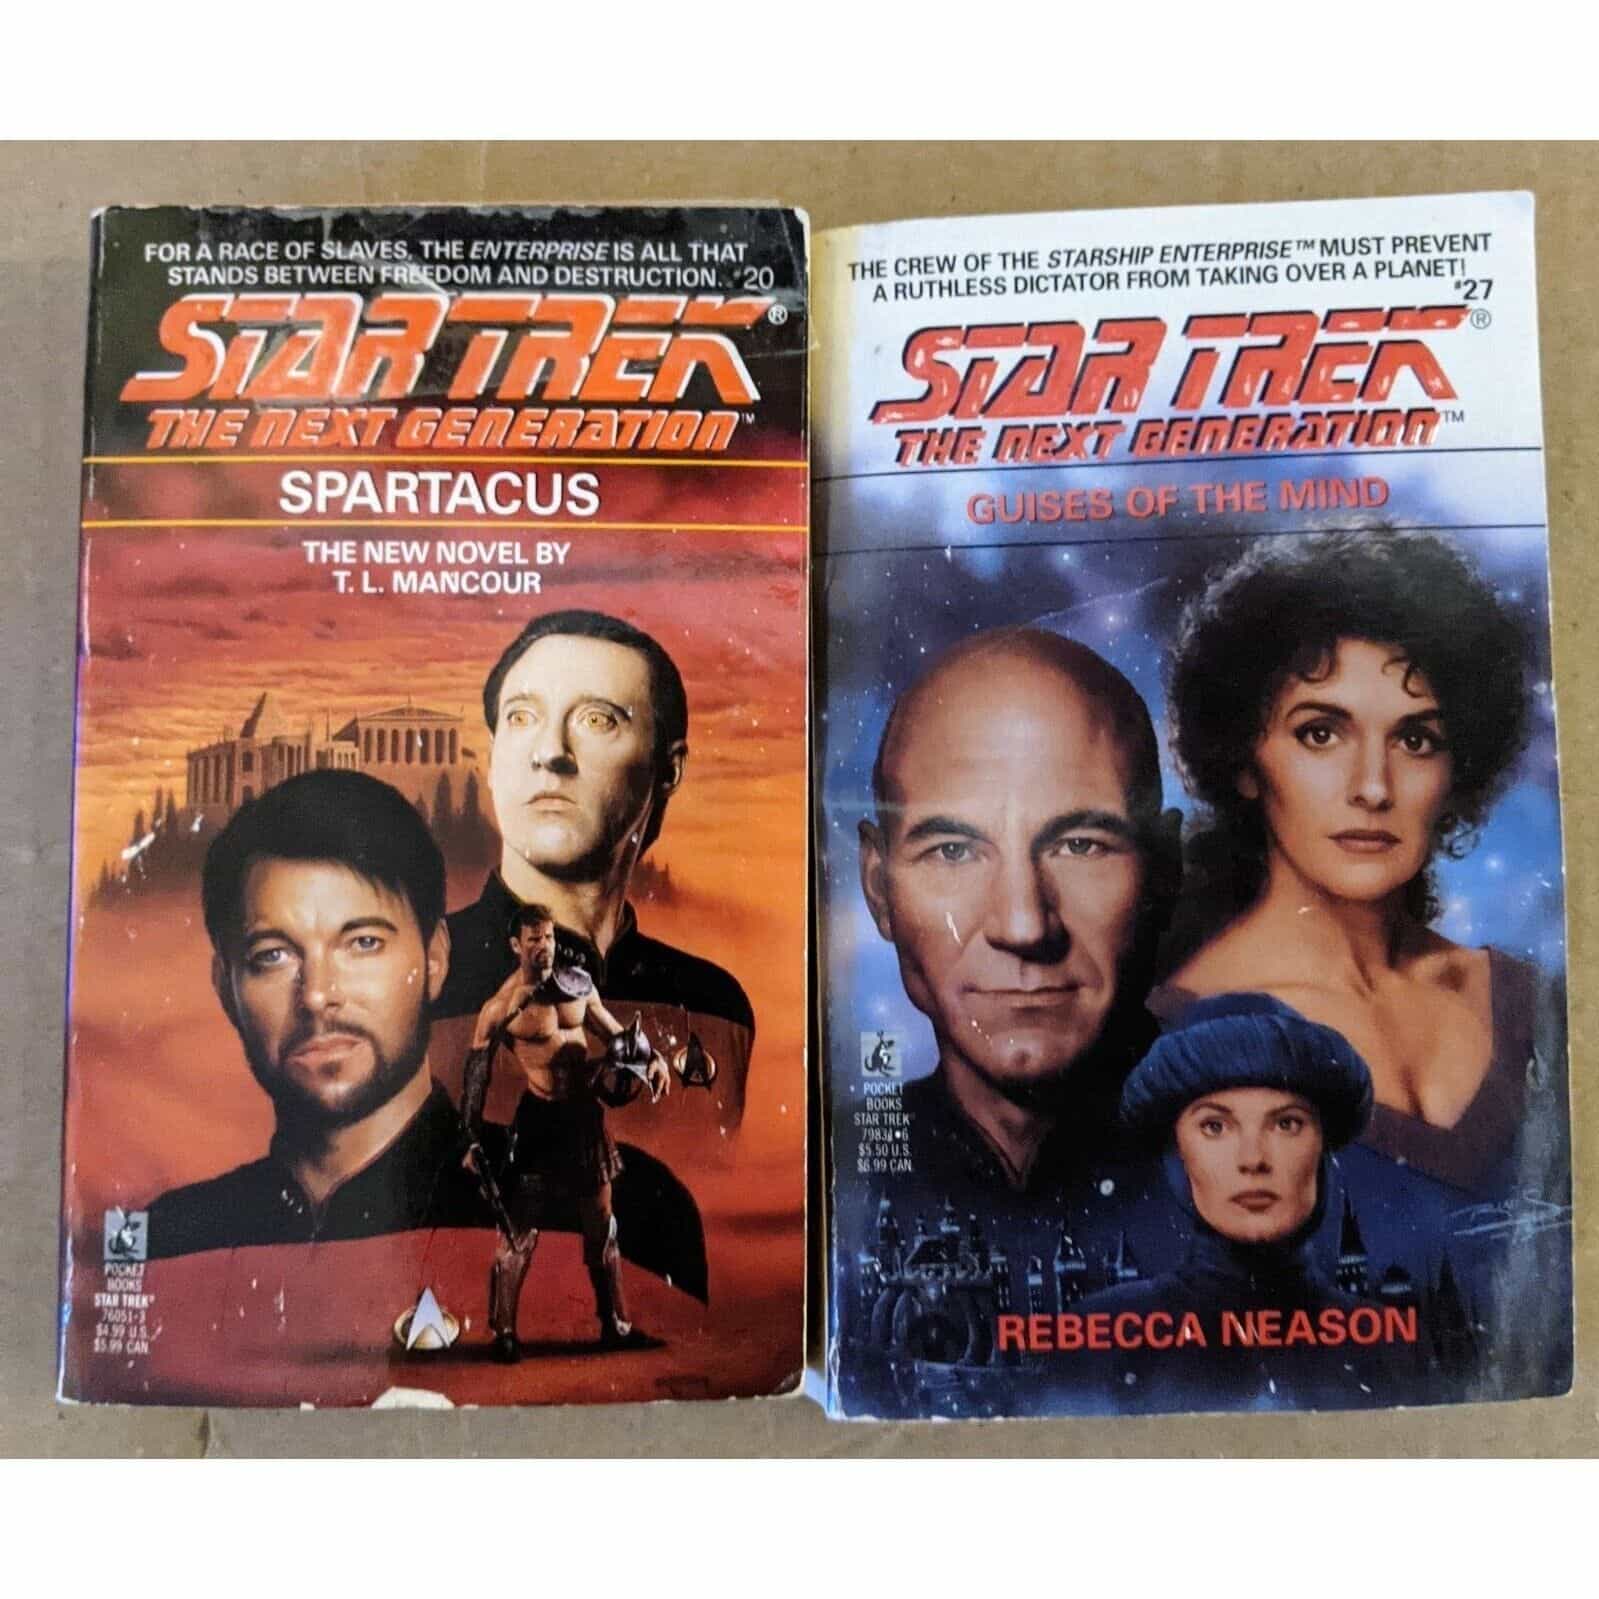 Star Trek The Next Generation Book Set of 2 – Spartacus & Guises of the Mind